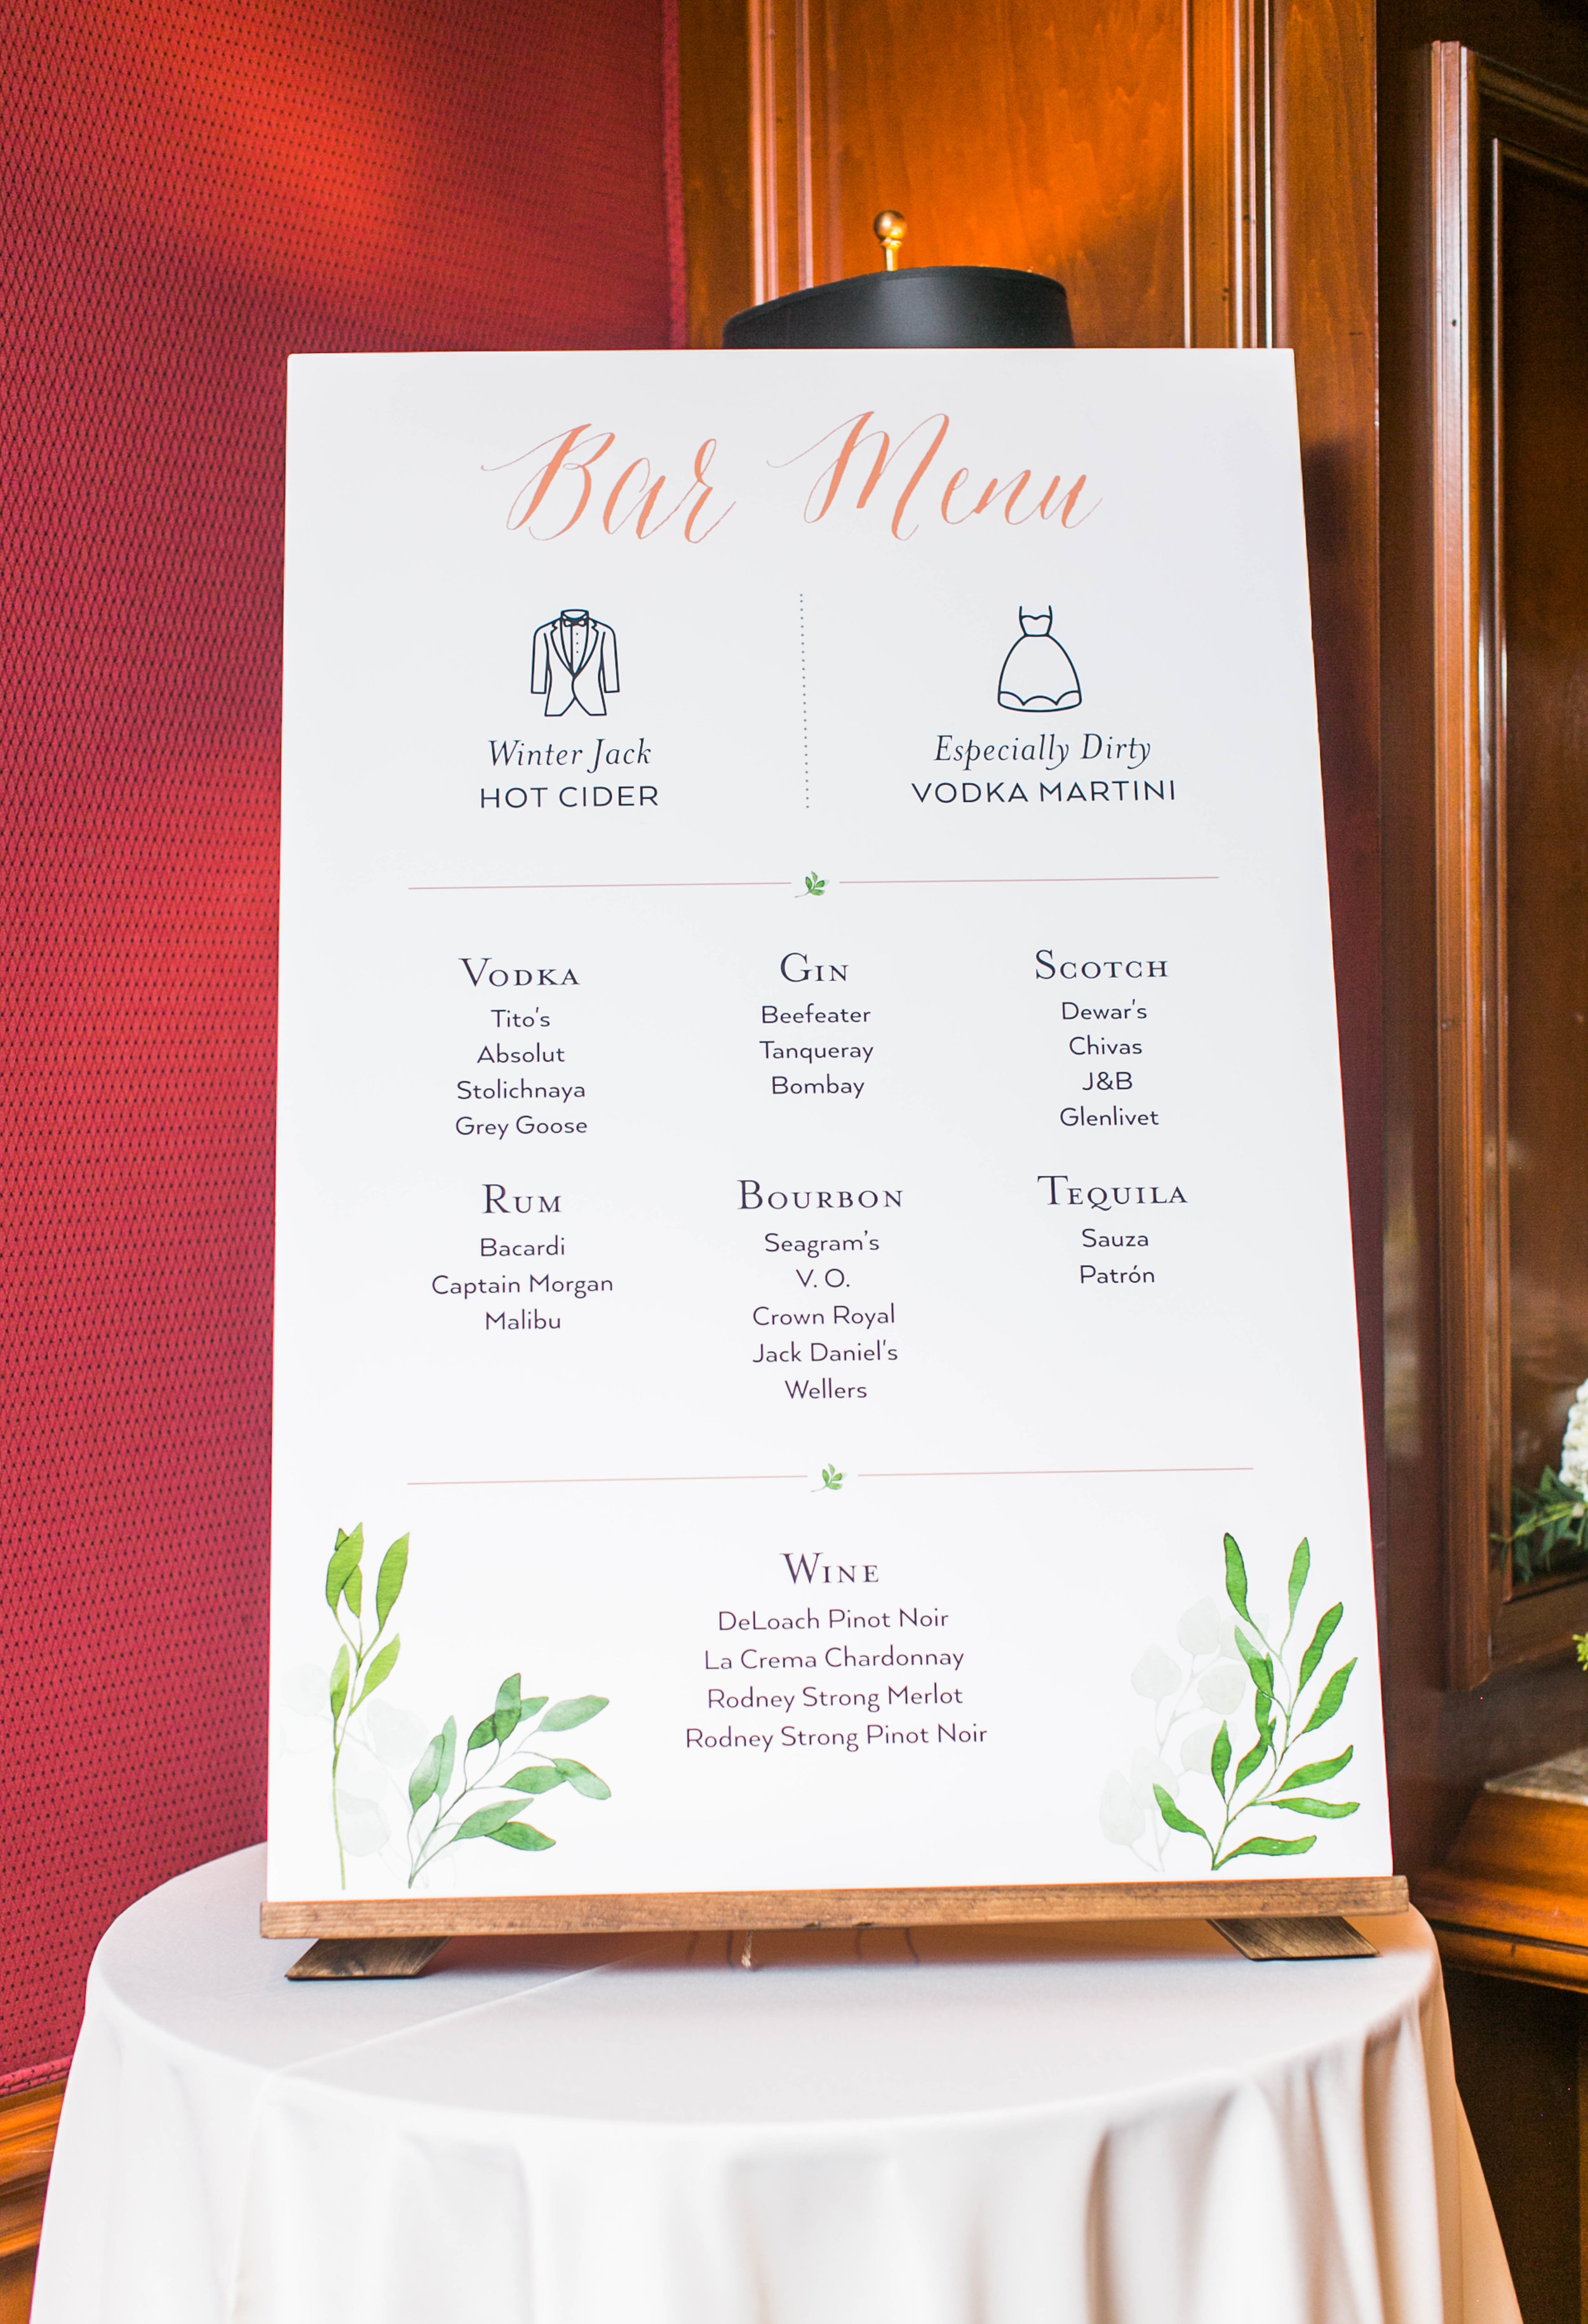  After the ceremony, there was a cocktail hour and a poster-sized bar menu. 